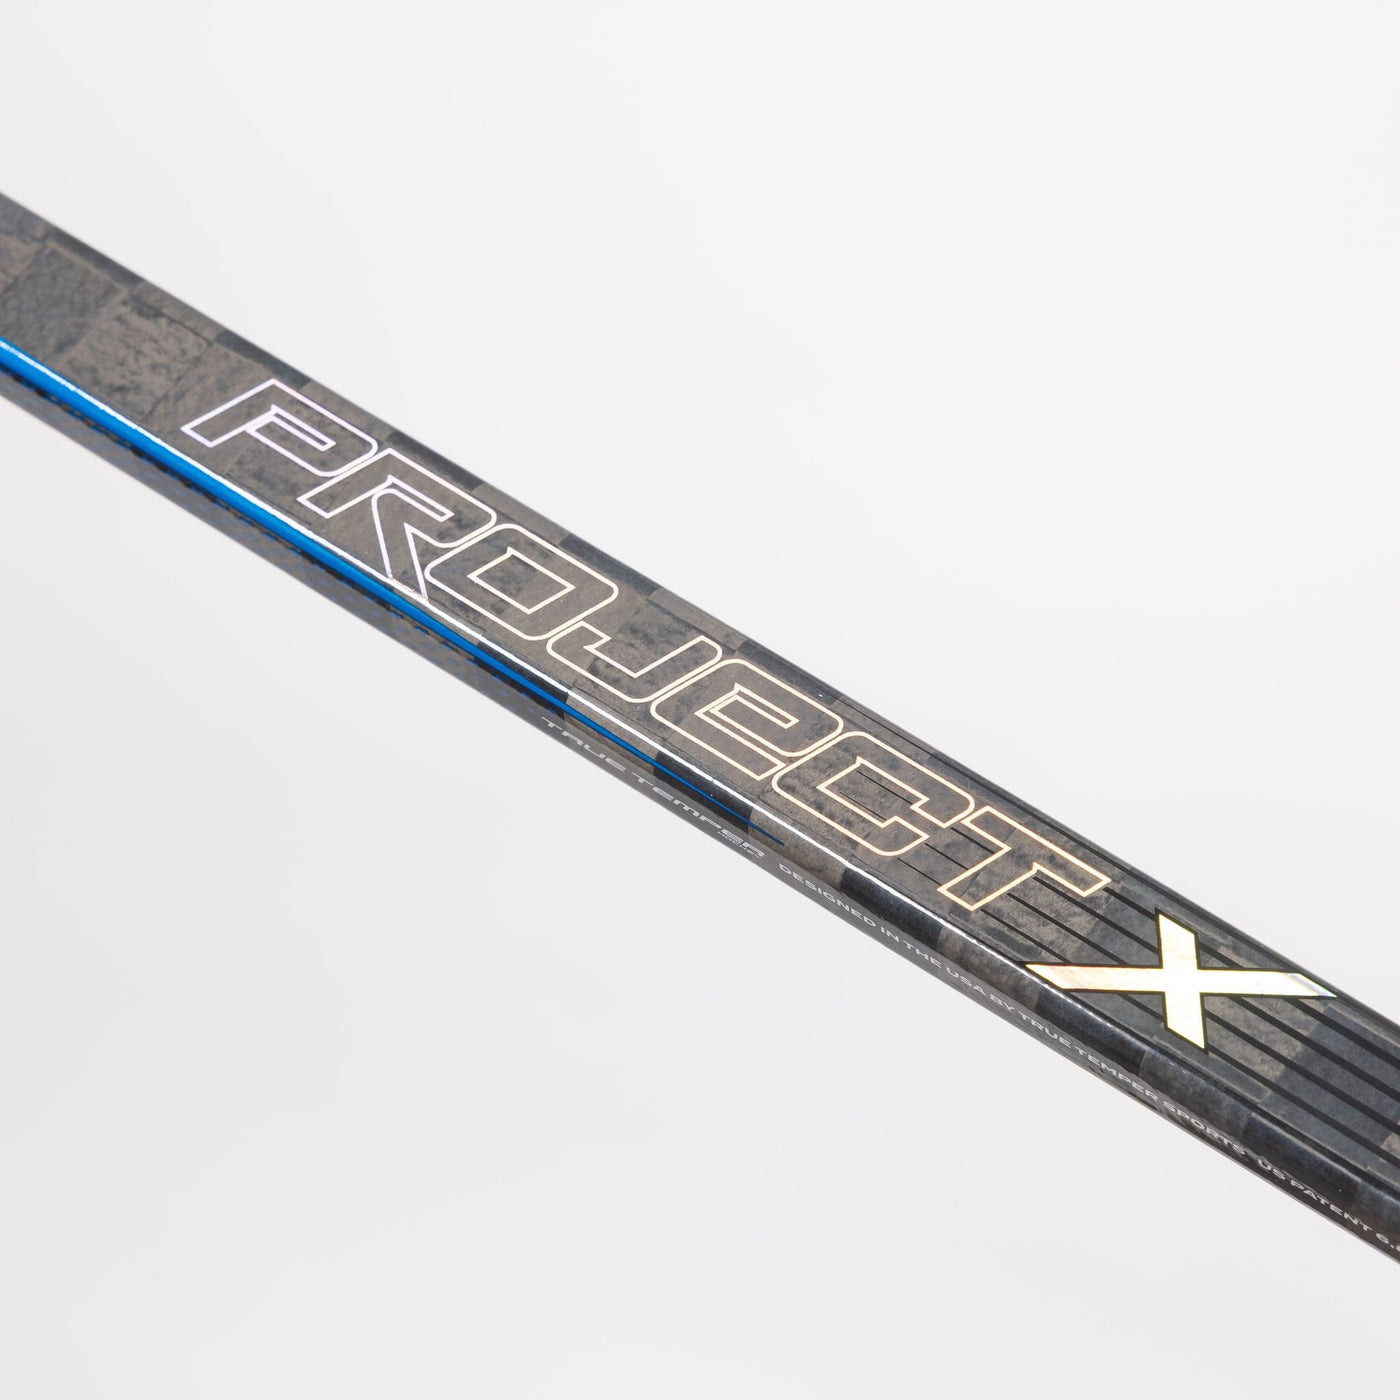 TRUE Project X Youth Hockey Stick - The Hockey Shop Source For Sports